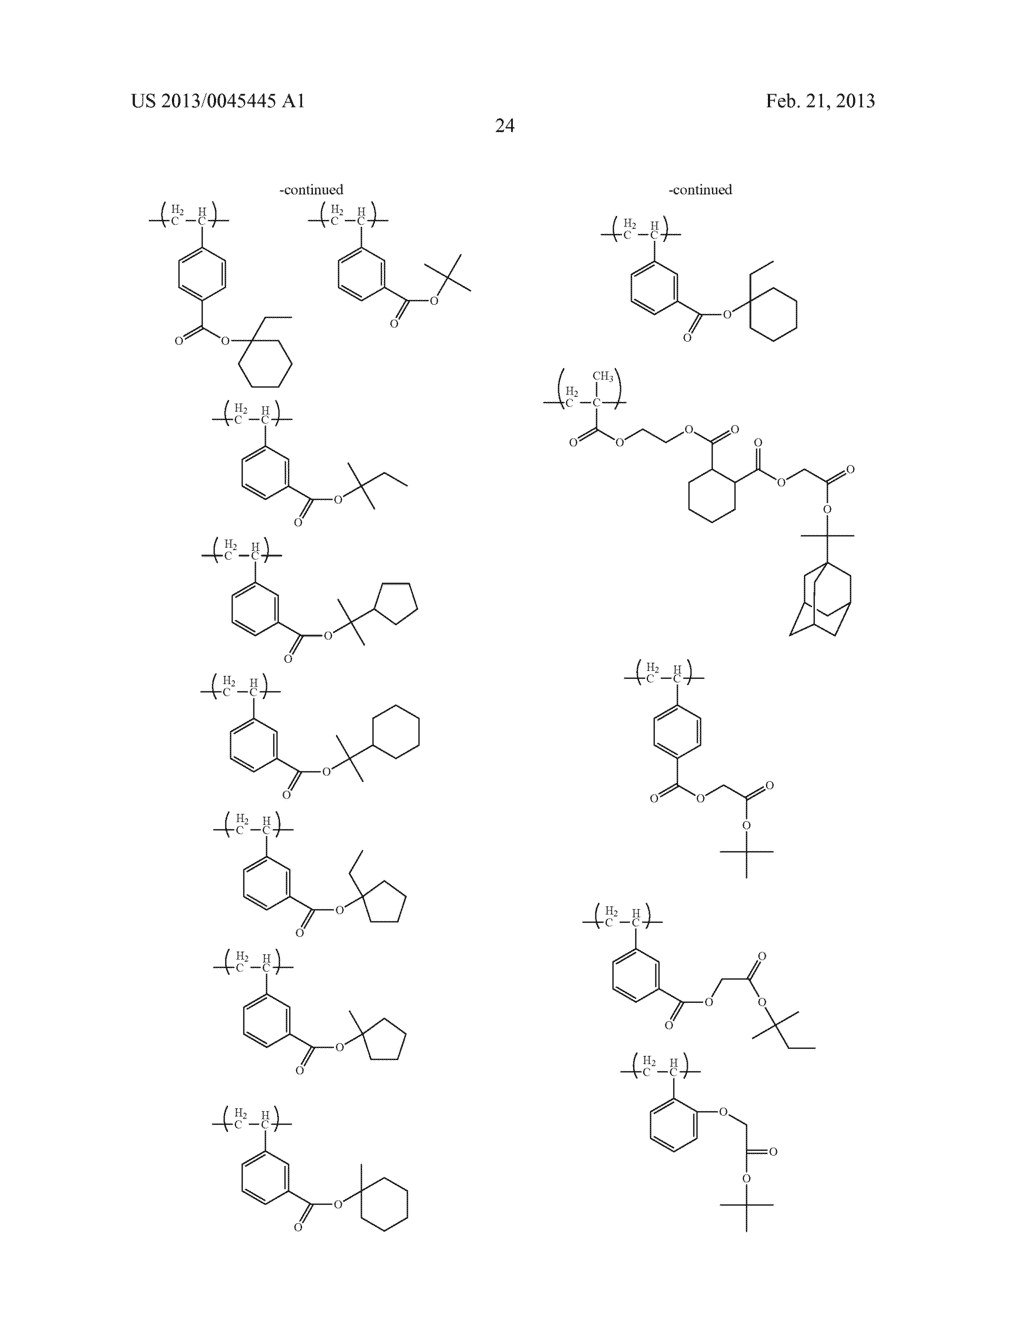 ACTINIC-RAY- OR RADIATION-SENSITIVE RESIN COMPOSITION, ACTINIC-RAY- OR     RADIATION-SENSITIVE RESIN FILM THEREFROM AND METHOD OF FORMING PATTERN     USING THE COMPOSITION - diagram, schematic, and image 25